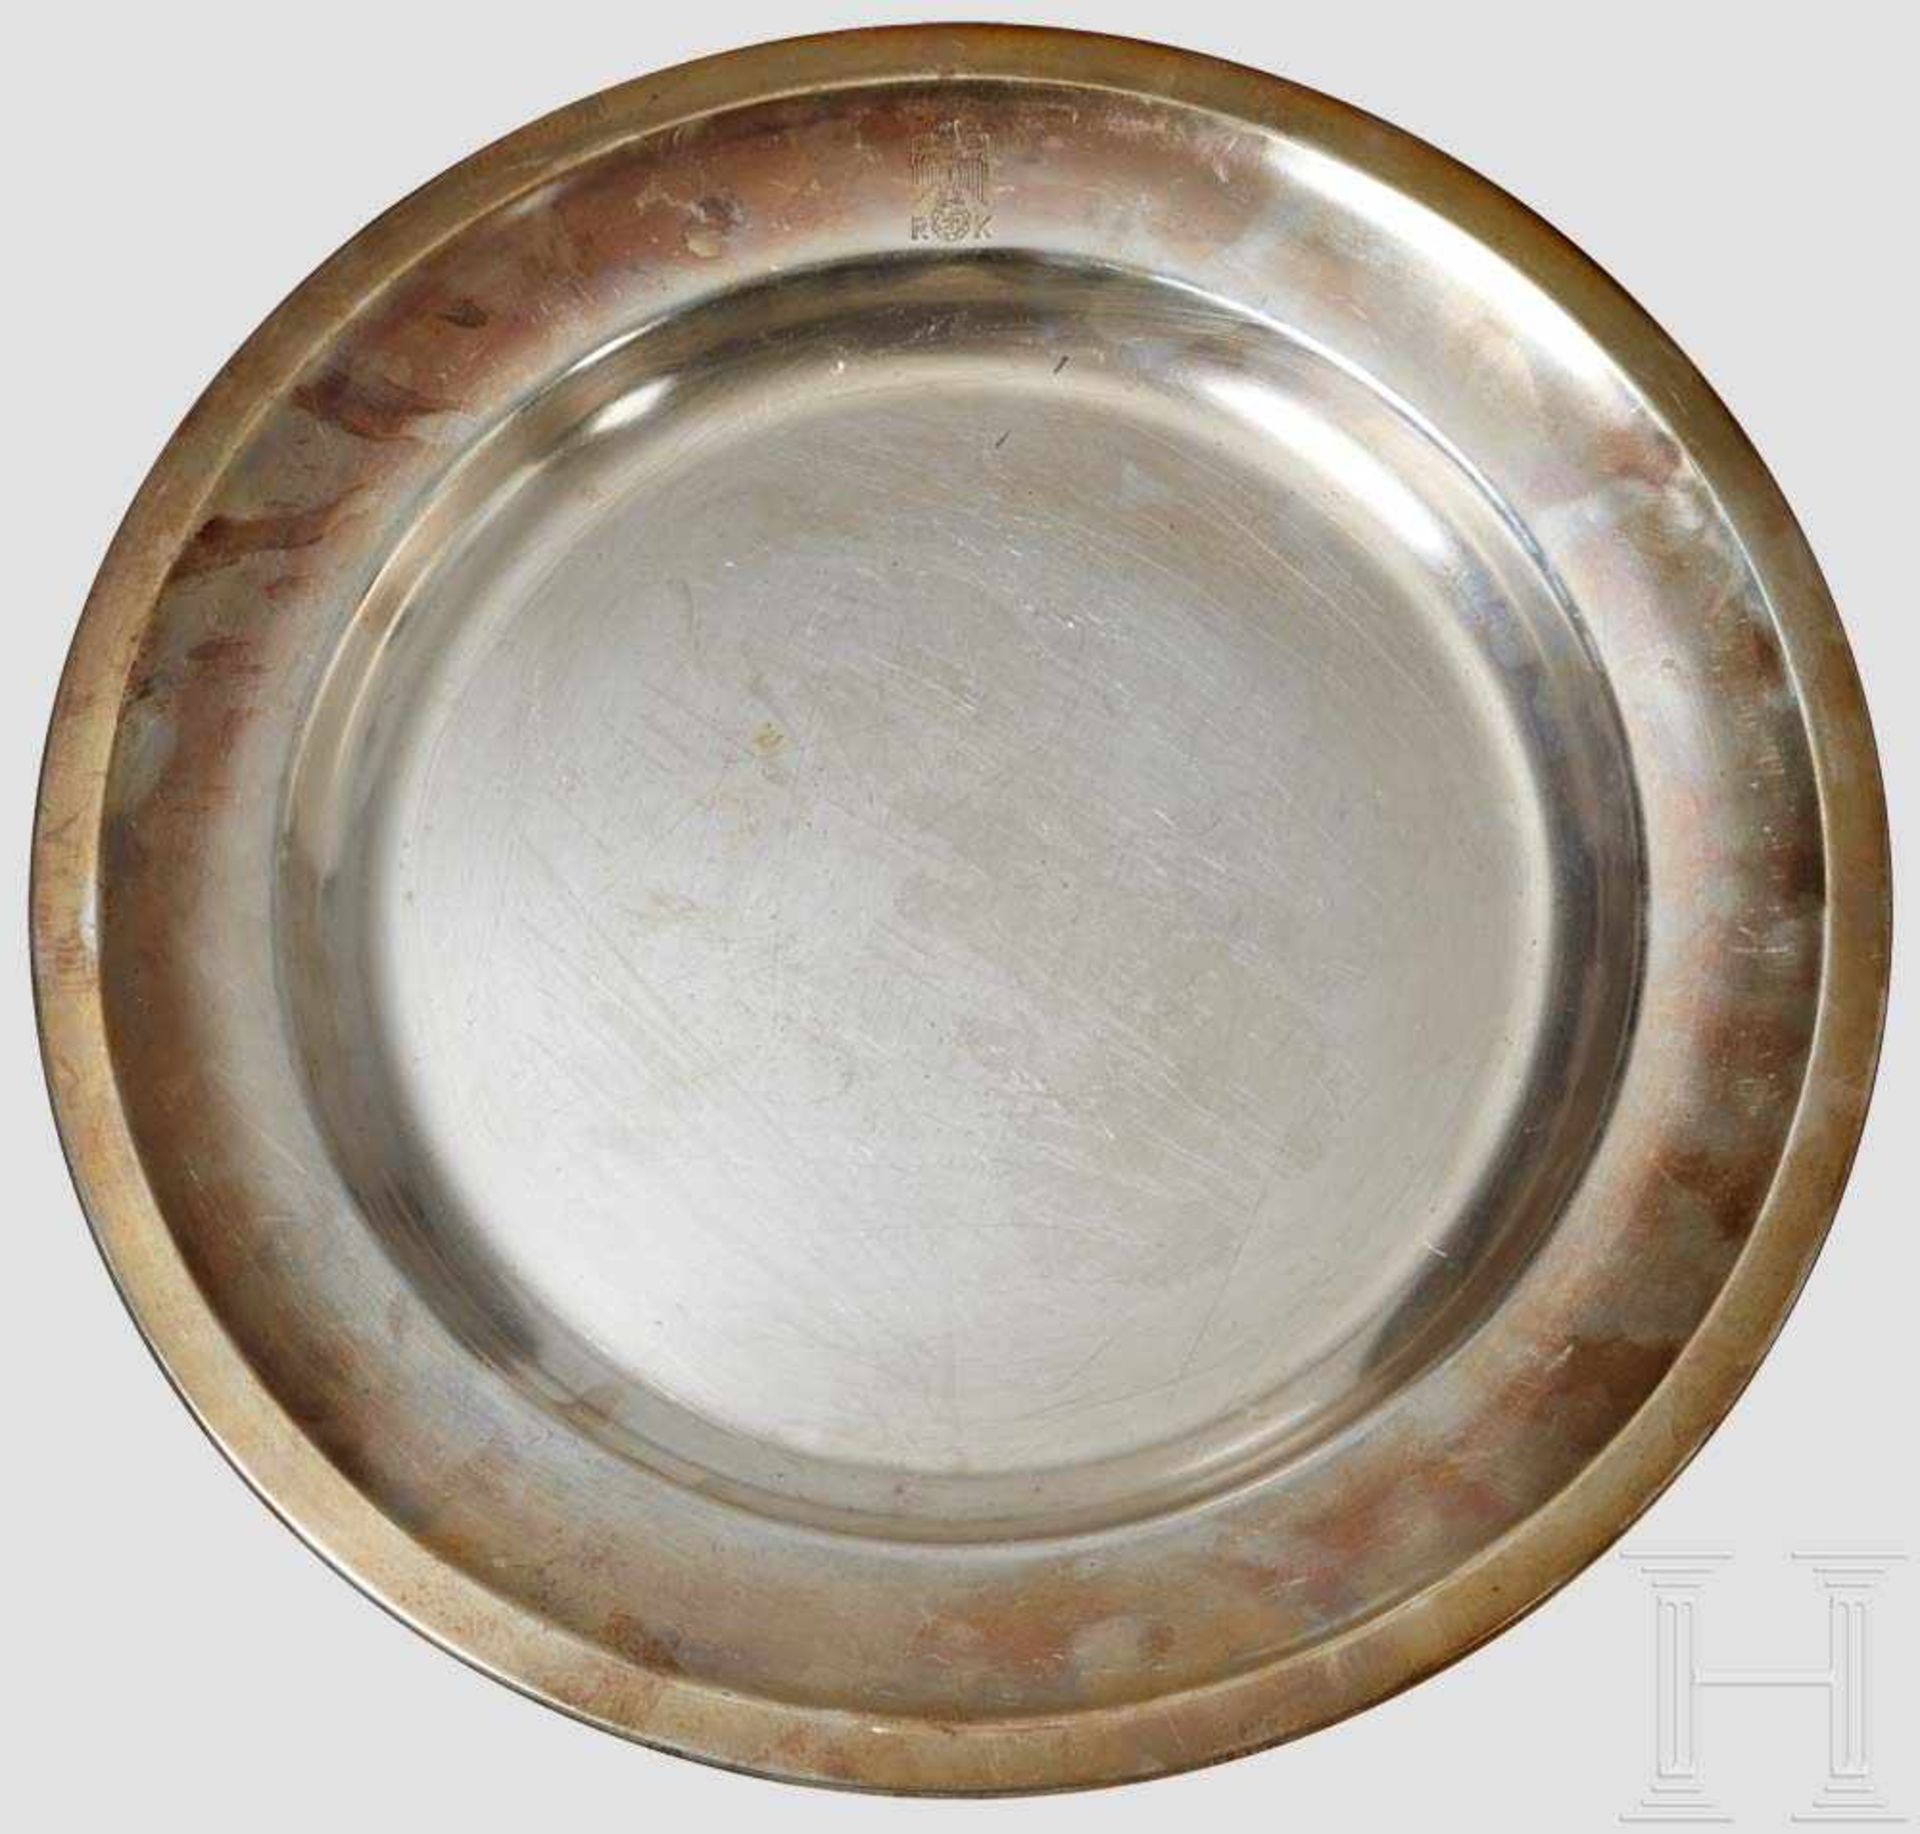 Adolf Hitler - a Medium Round Serving Platter from the Table Silver of the New Reich Chancellery,